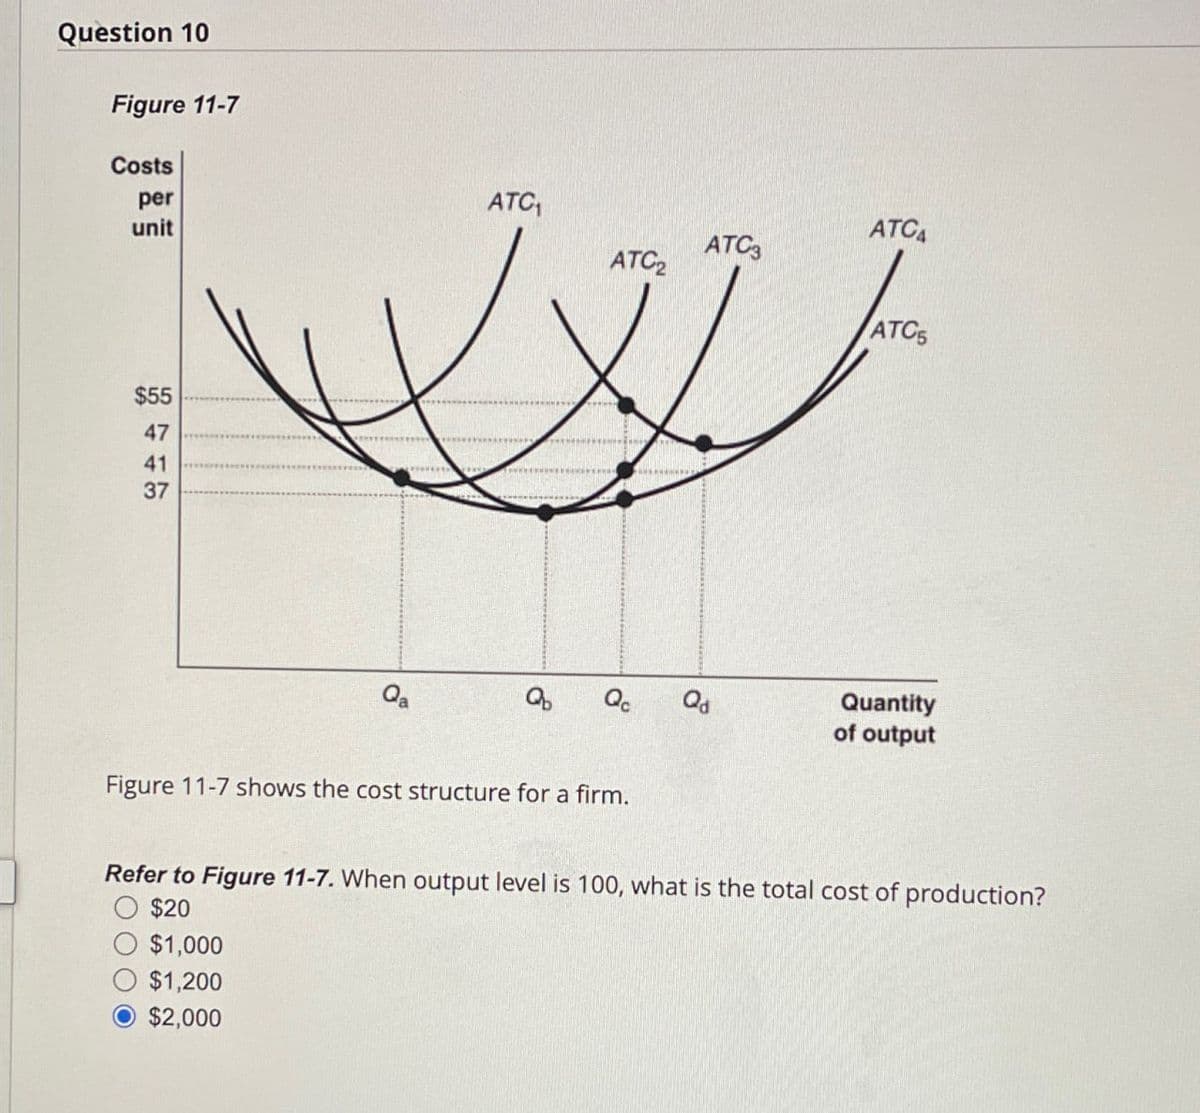 Question 10
Figure 11-7
Costs
per
unit
$55
47
41
37
ATC₁
ATCA
ATC3
ATC2
ATC5
Qa
Q
Qc
Qd
Quantity
of output
Figure 11-7 shows the cost structure for a firm.
Refer to Figure 11-7. When output level is 100, what is the total cost of production?
$20
$1,000
$1,200
$2,000